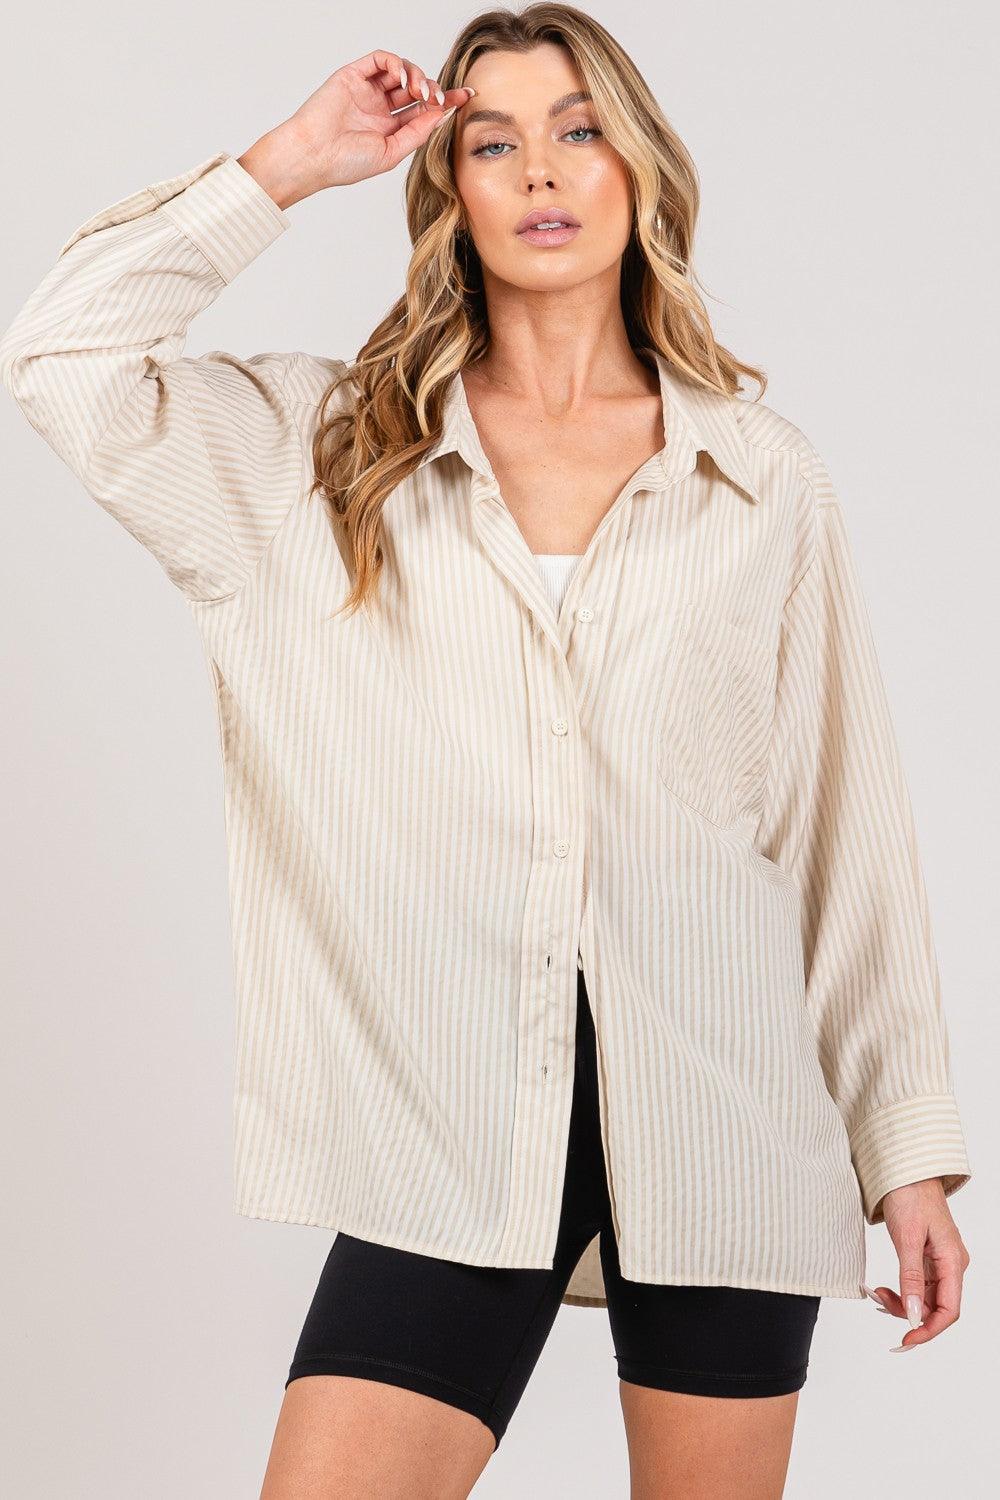 SAGE + FIG Striped Button Up Long Sleeve Shirt - Wildflower Hippies